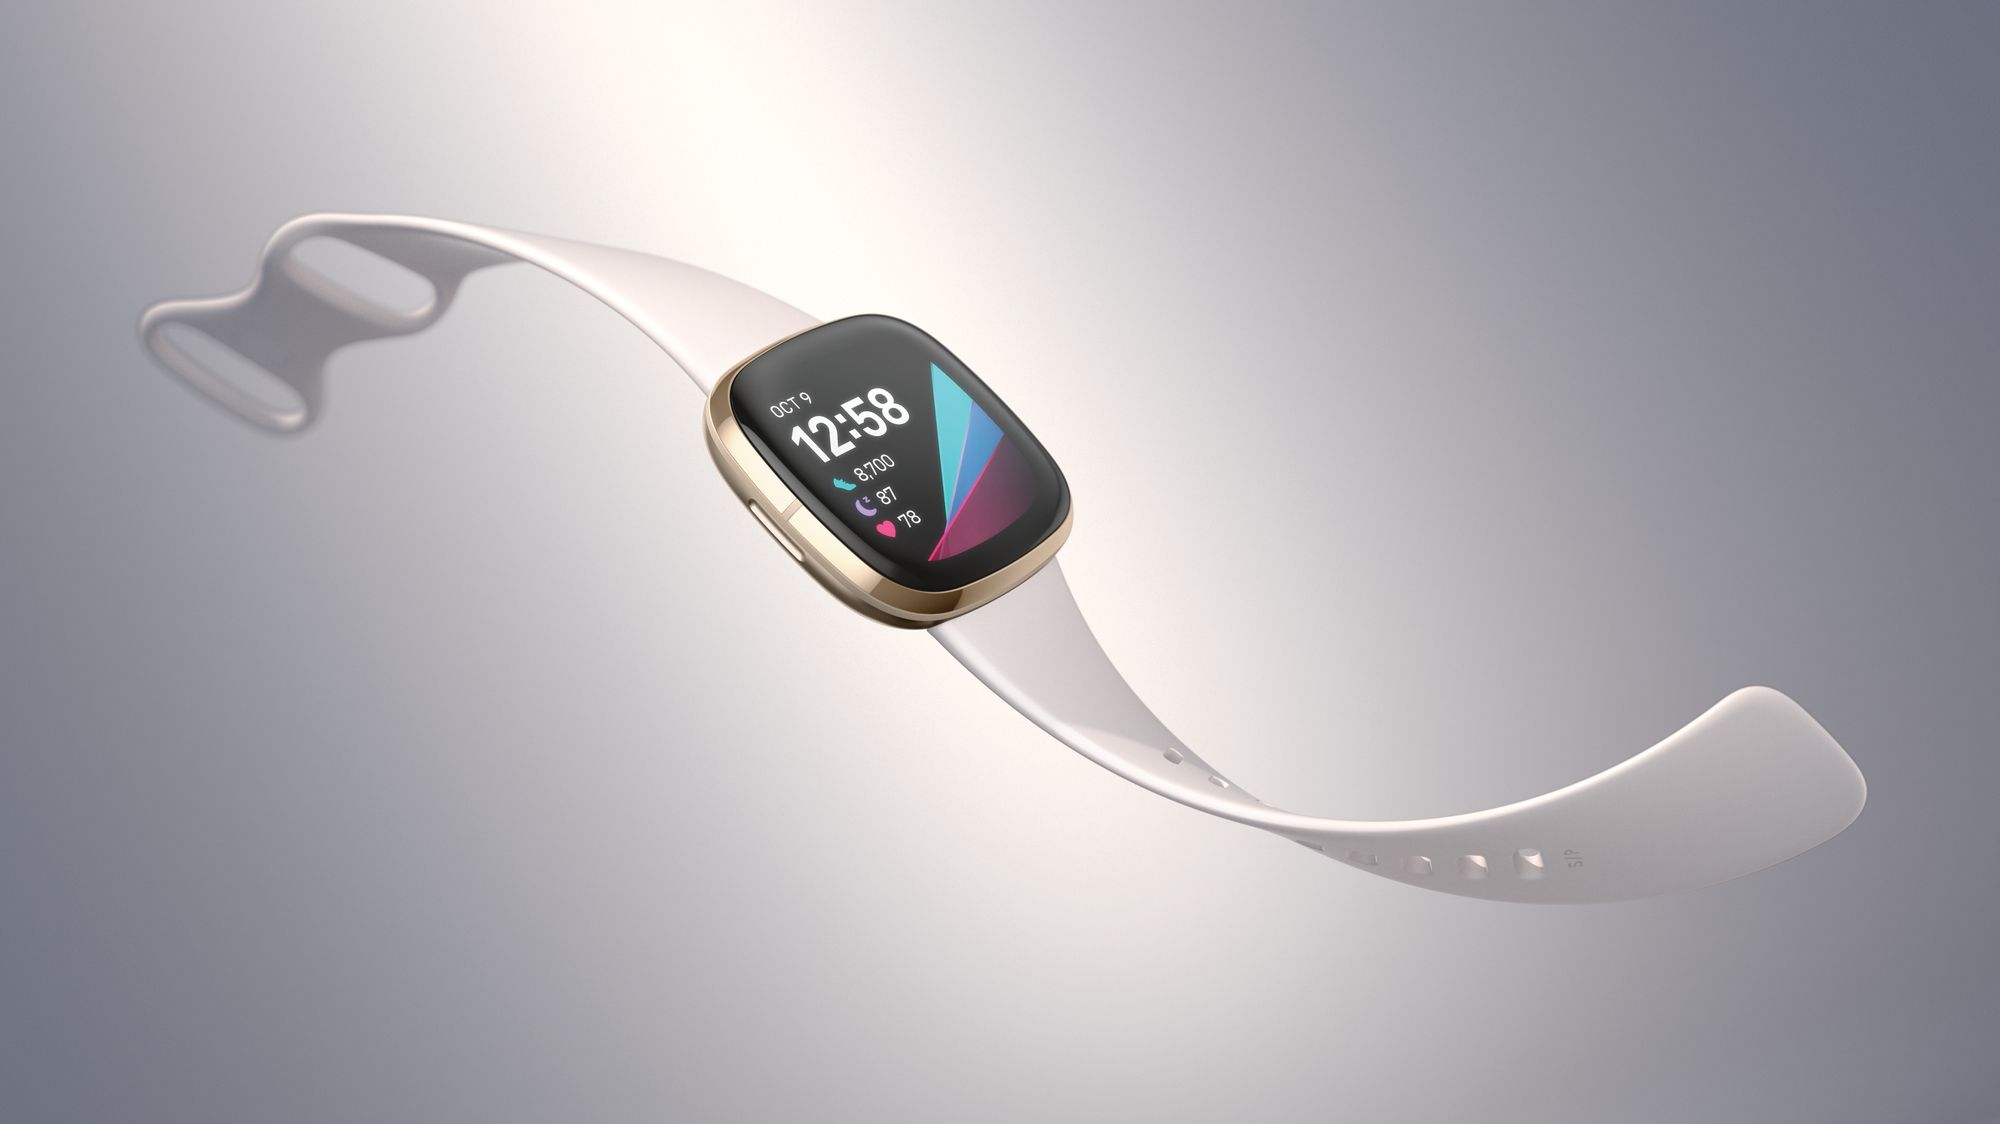 Fitbit Patents a New Blood Pressure Sensor for Its Smartwatches - Gizmochina